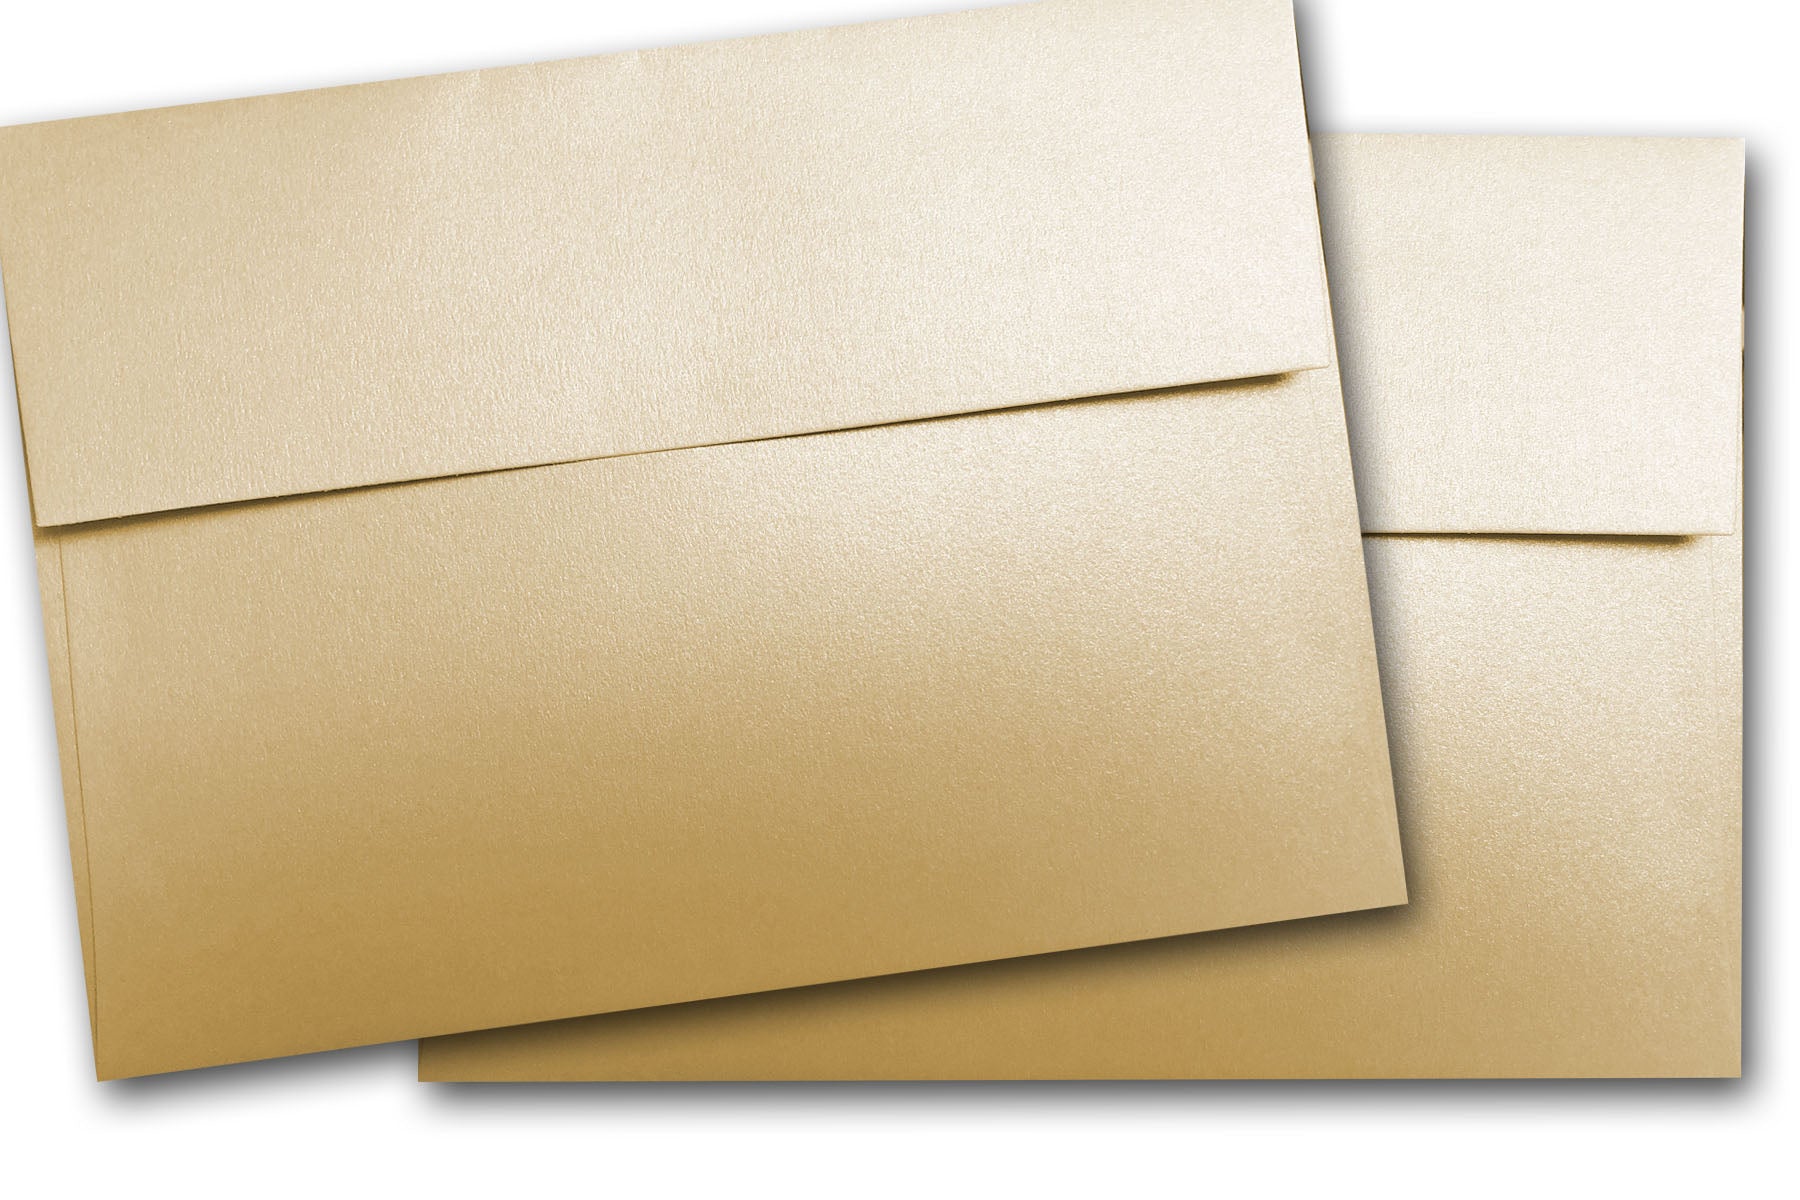 50 Pack A7 Metallic Gold Self-Sealing Envelopes for 5x7 Cards - Bulk Set of  Gold Envelopes for Wedding, Birthday Party, Greeting Cards, Thank You Cards